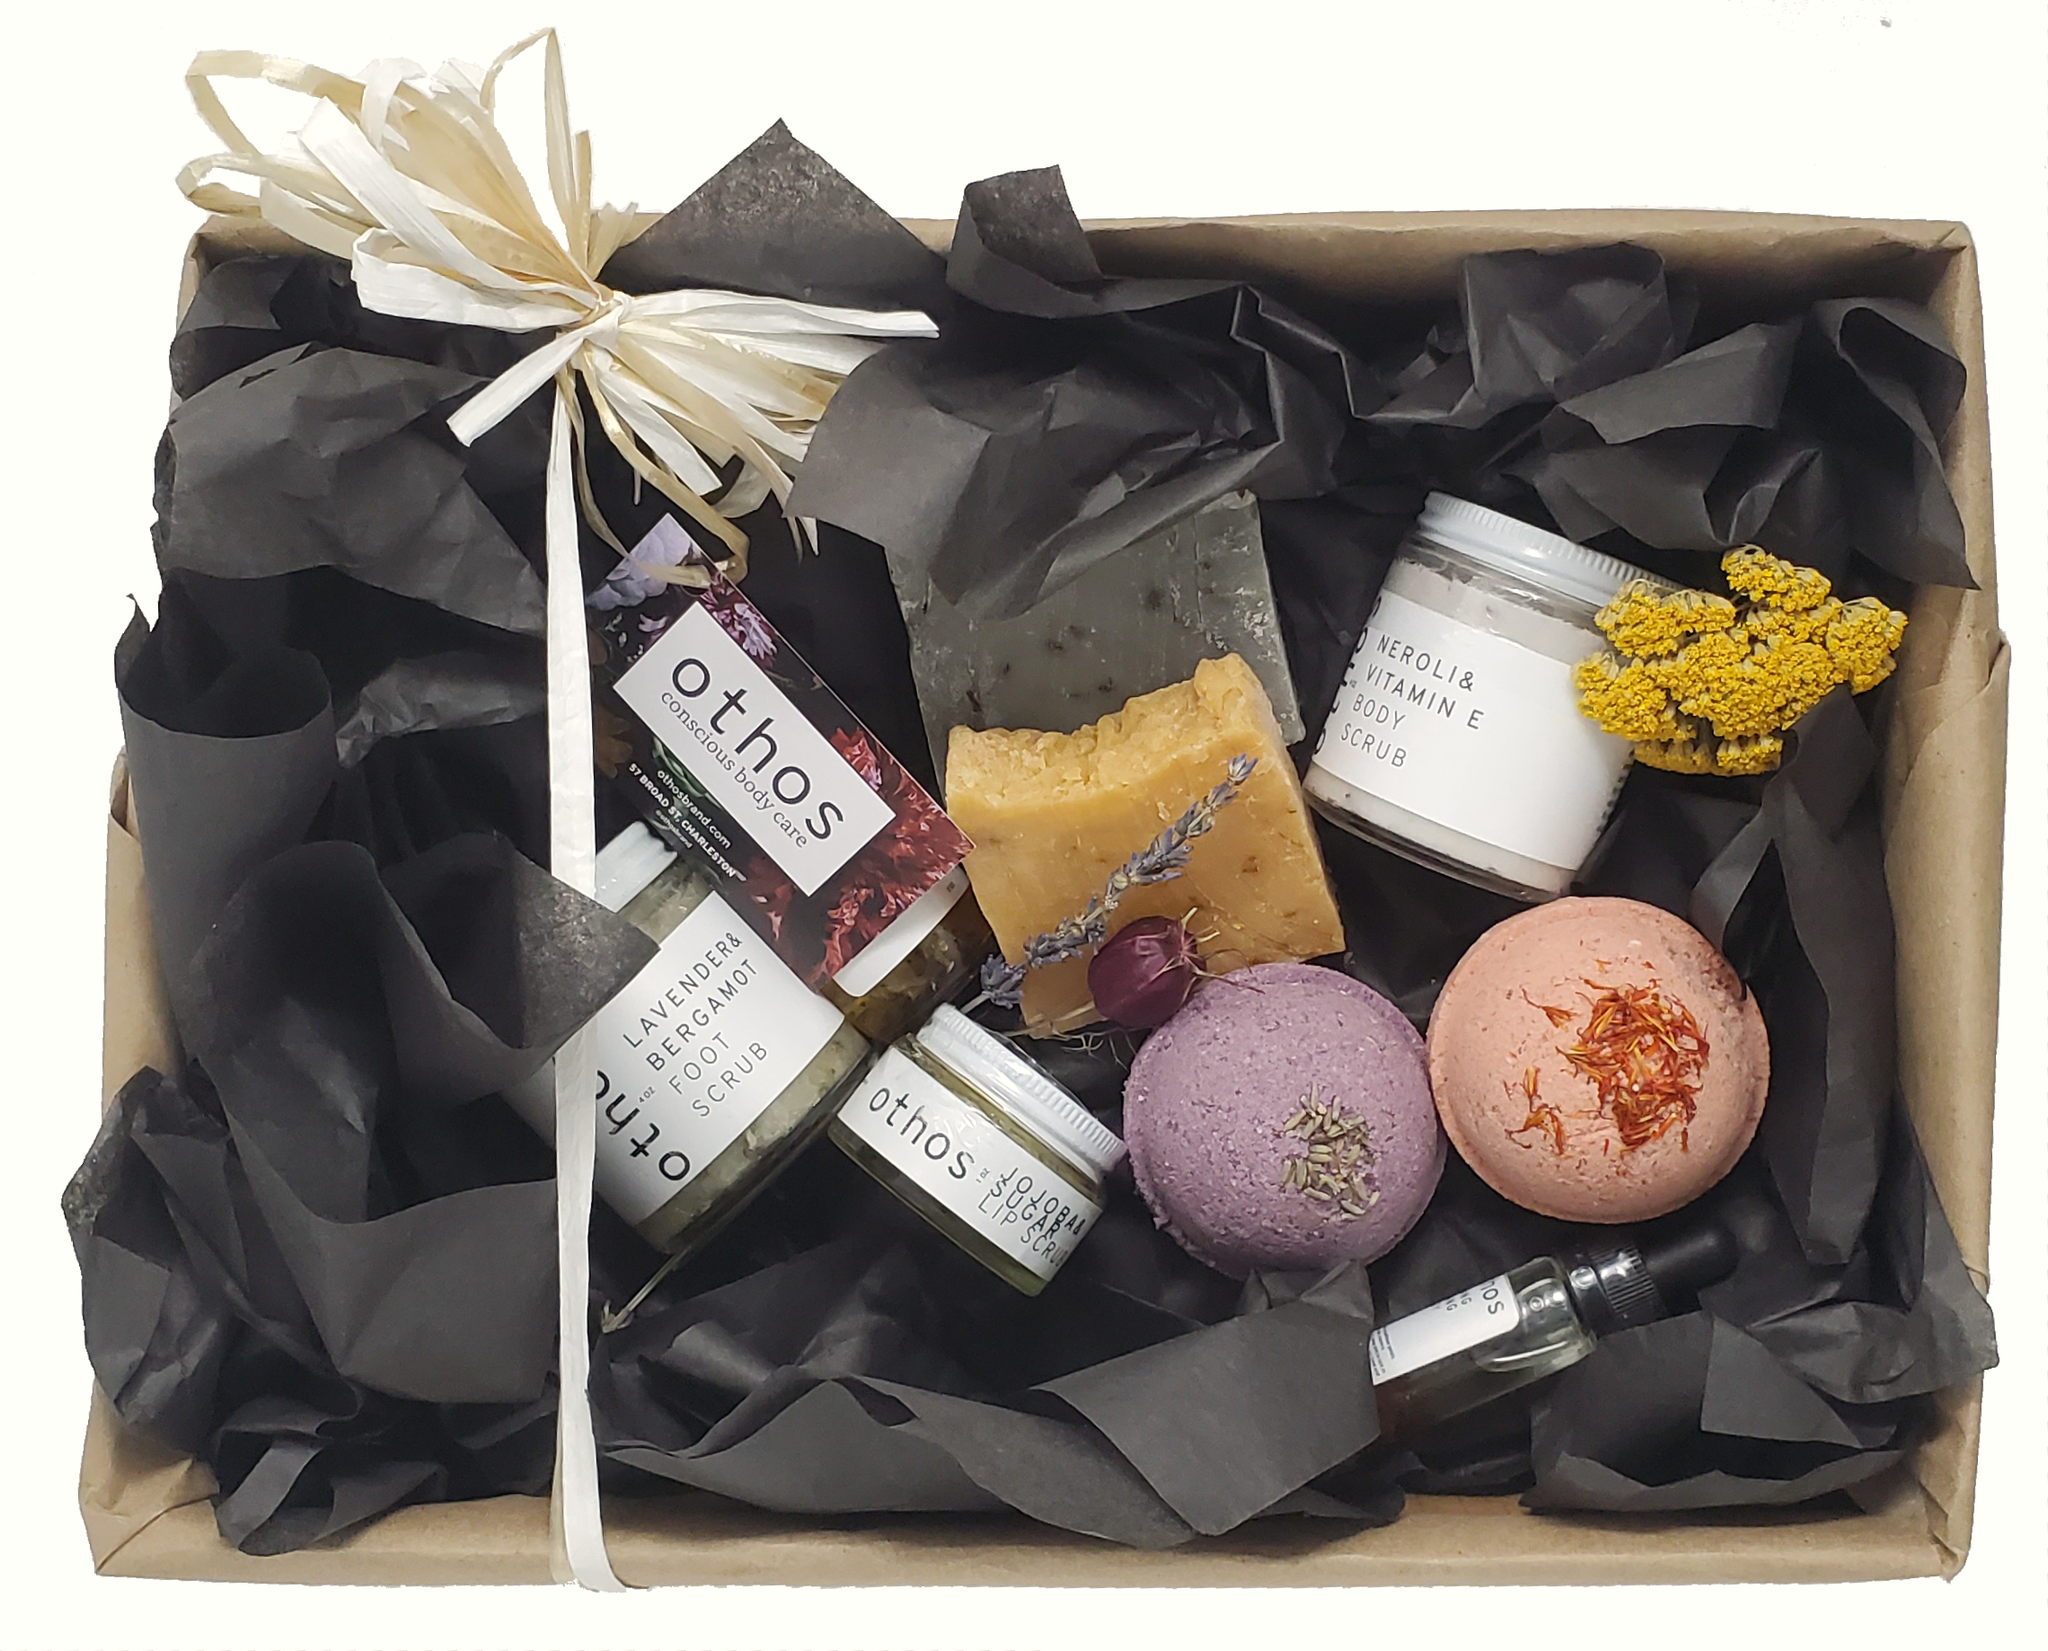 an open gift box of assorted othos products, including two bath bombs (lavender and ylang ylang), two bars of soap (citrus and mint), and lip scrub, body scrub, foot scrub, and body oil.